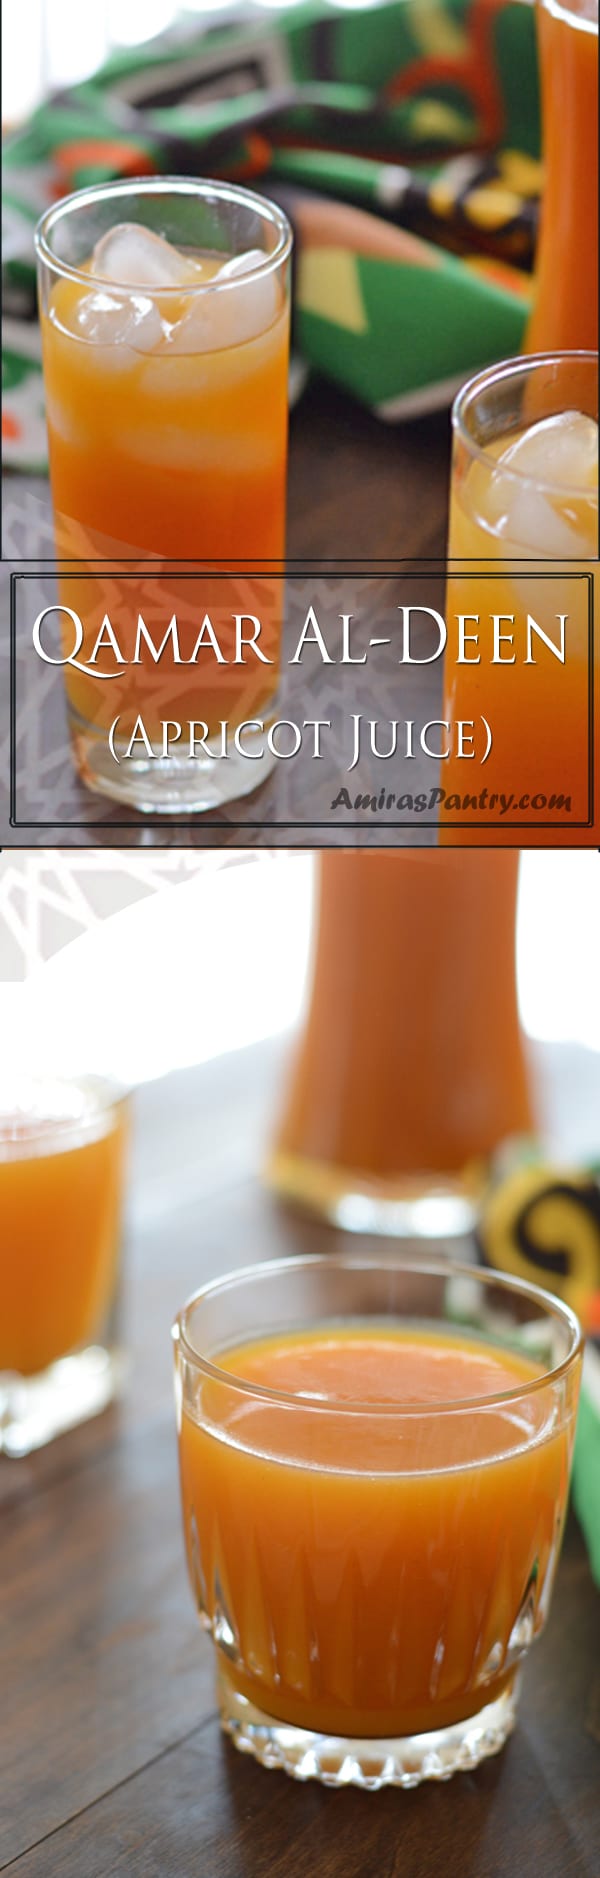 An infograph for Apricot juice recipe